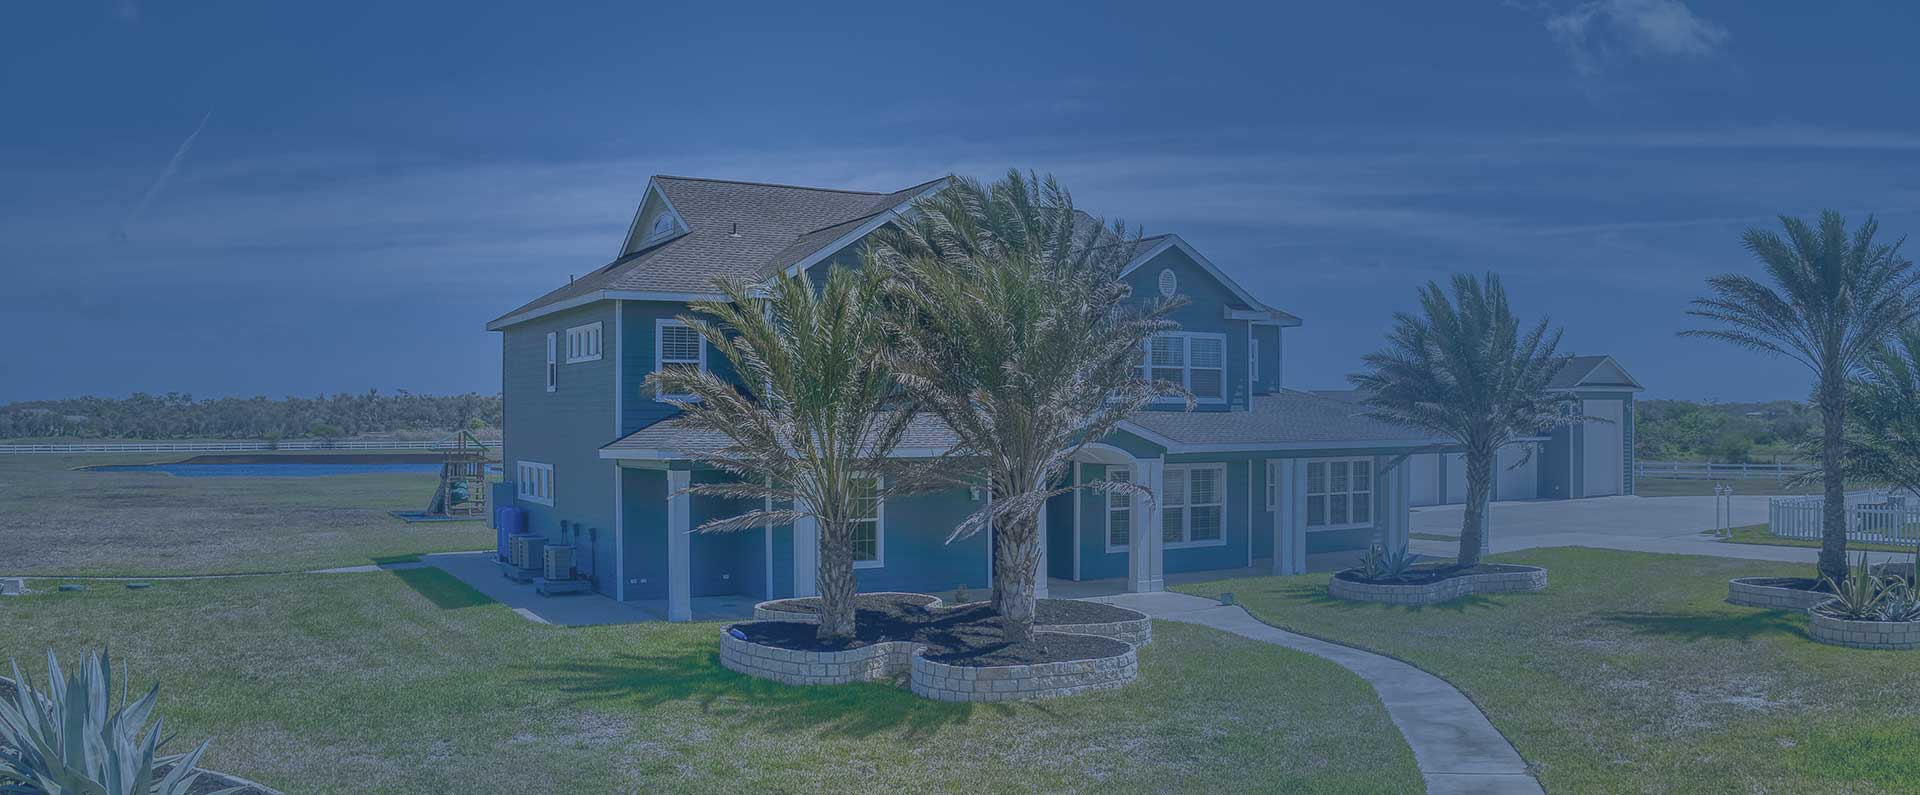 Homes in Rockport Texas | United States